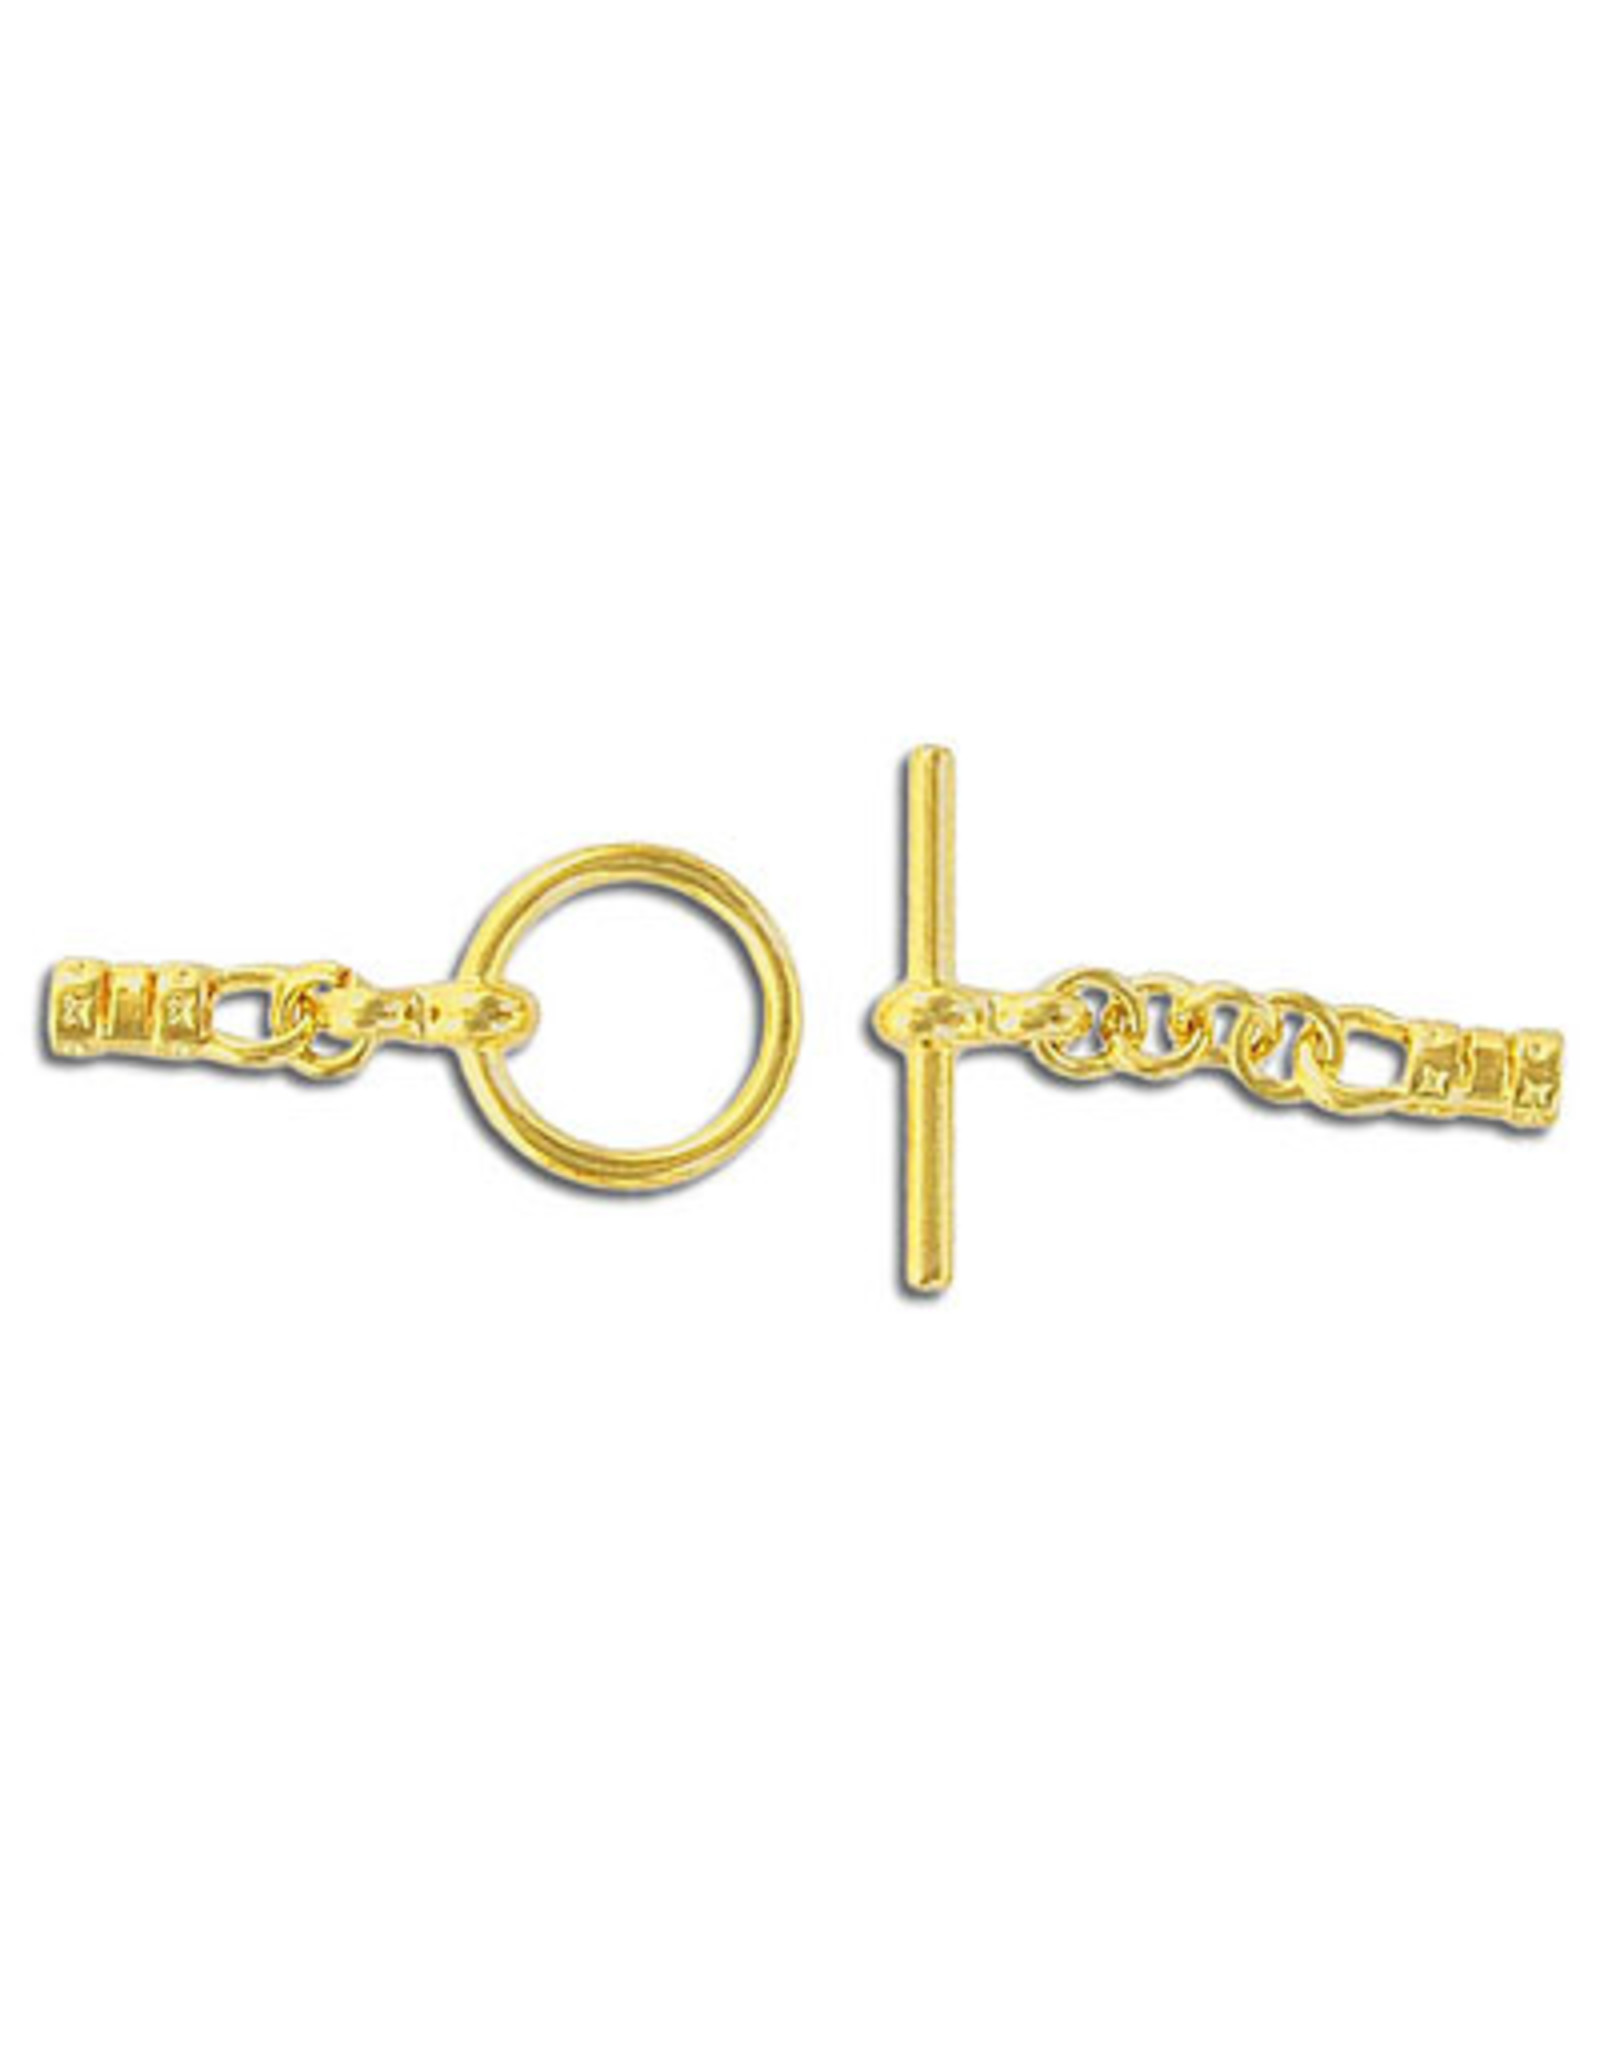 Toggle Clasp 12mm Round with 2mm Crimp Ends Gold  NF  x10